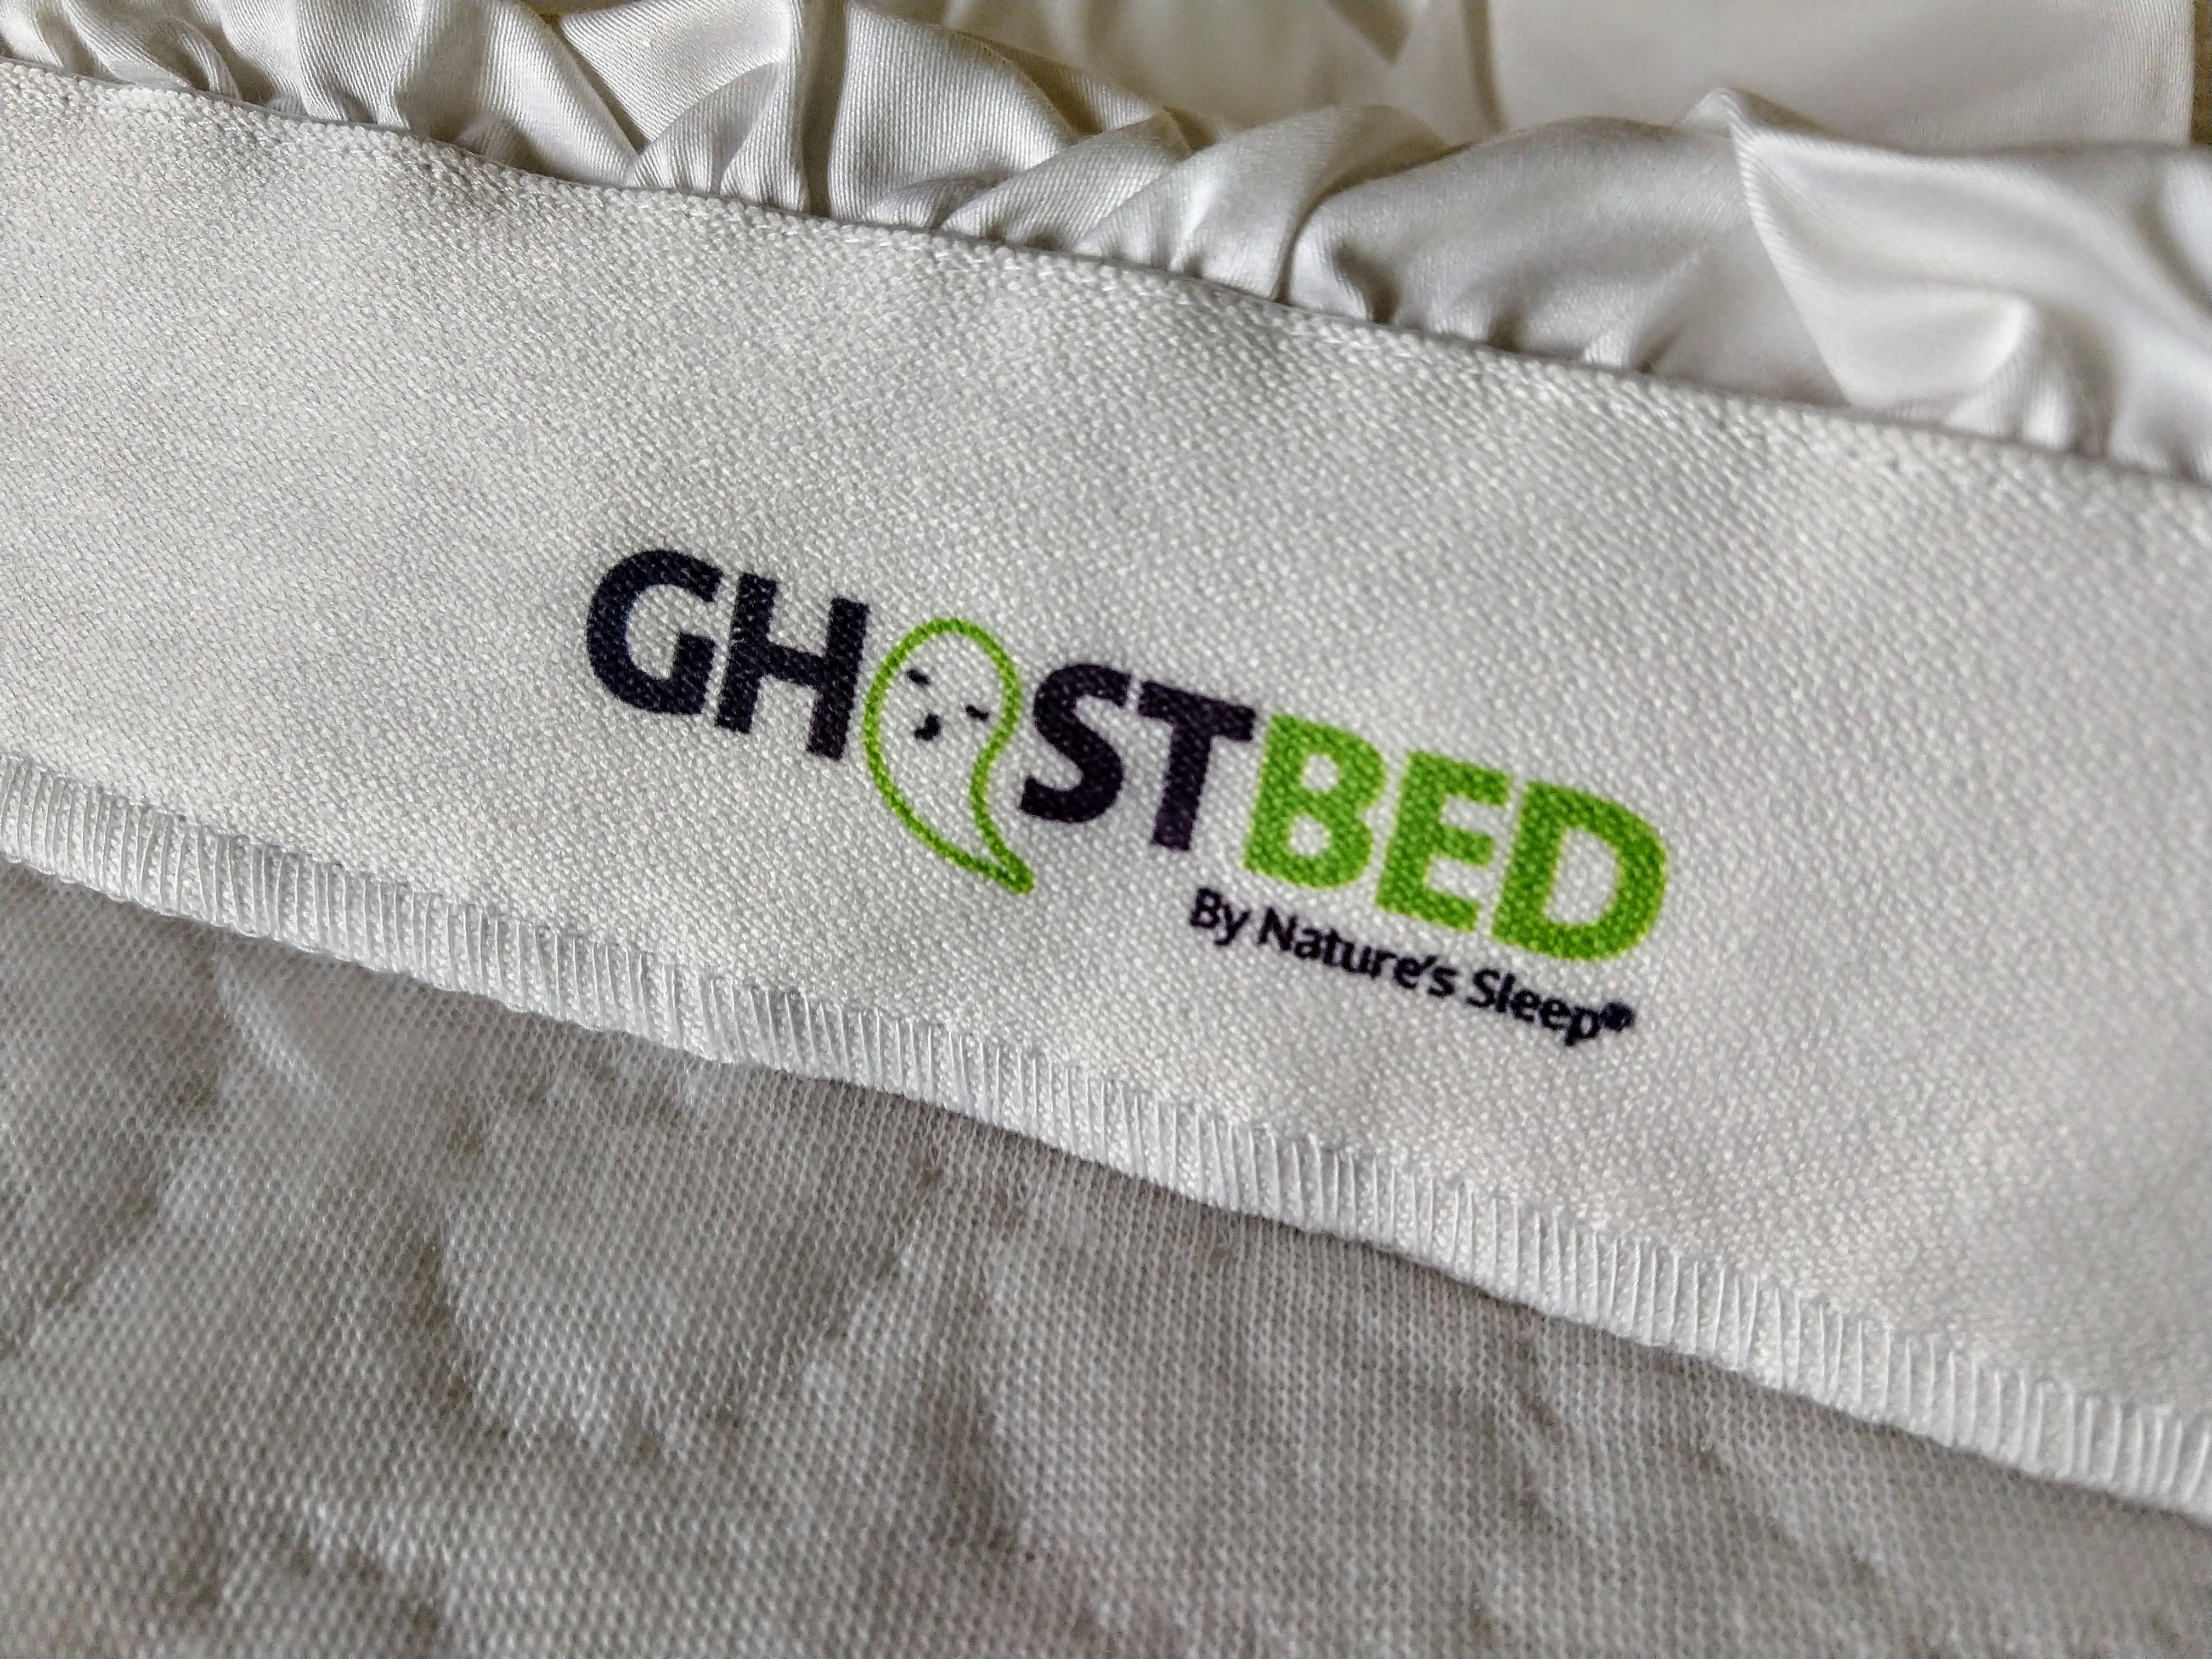 ghostbed sheets thread count